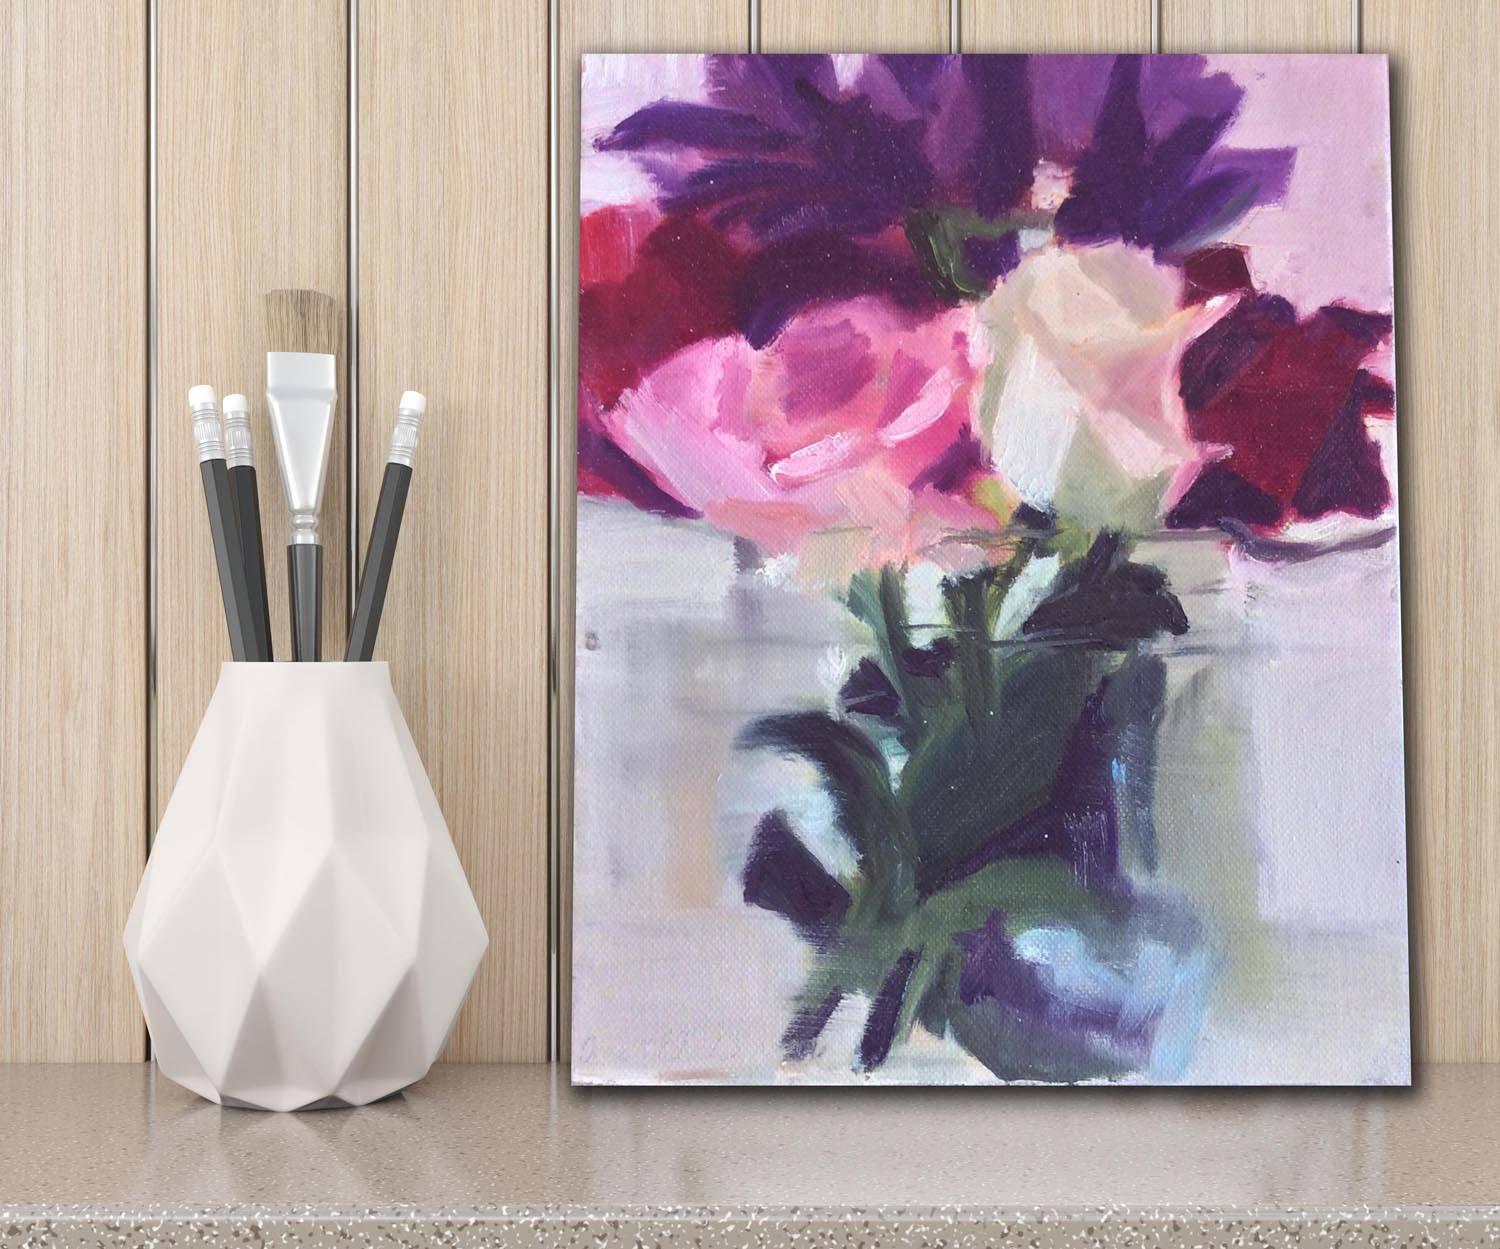 This small painted study of a flower bouquet by artist Christine Averill-Green is made with oil on canvas and the sides are painted grey. The painting measures 8